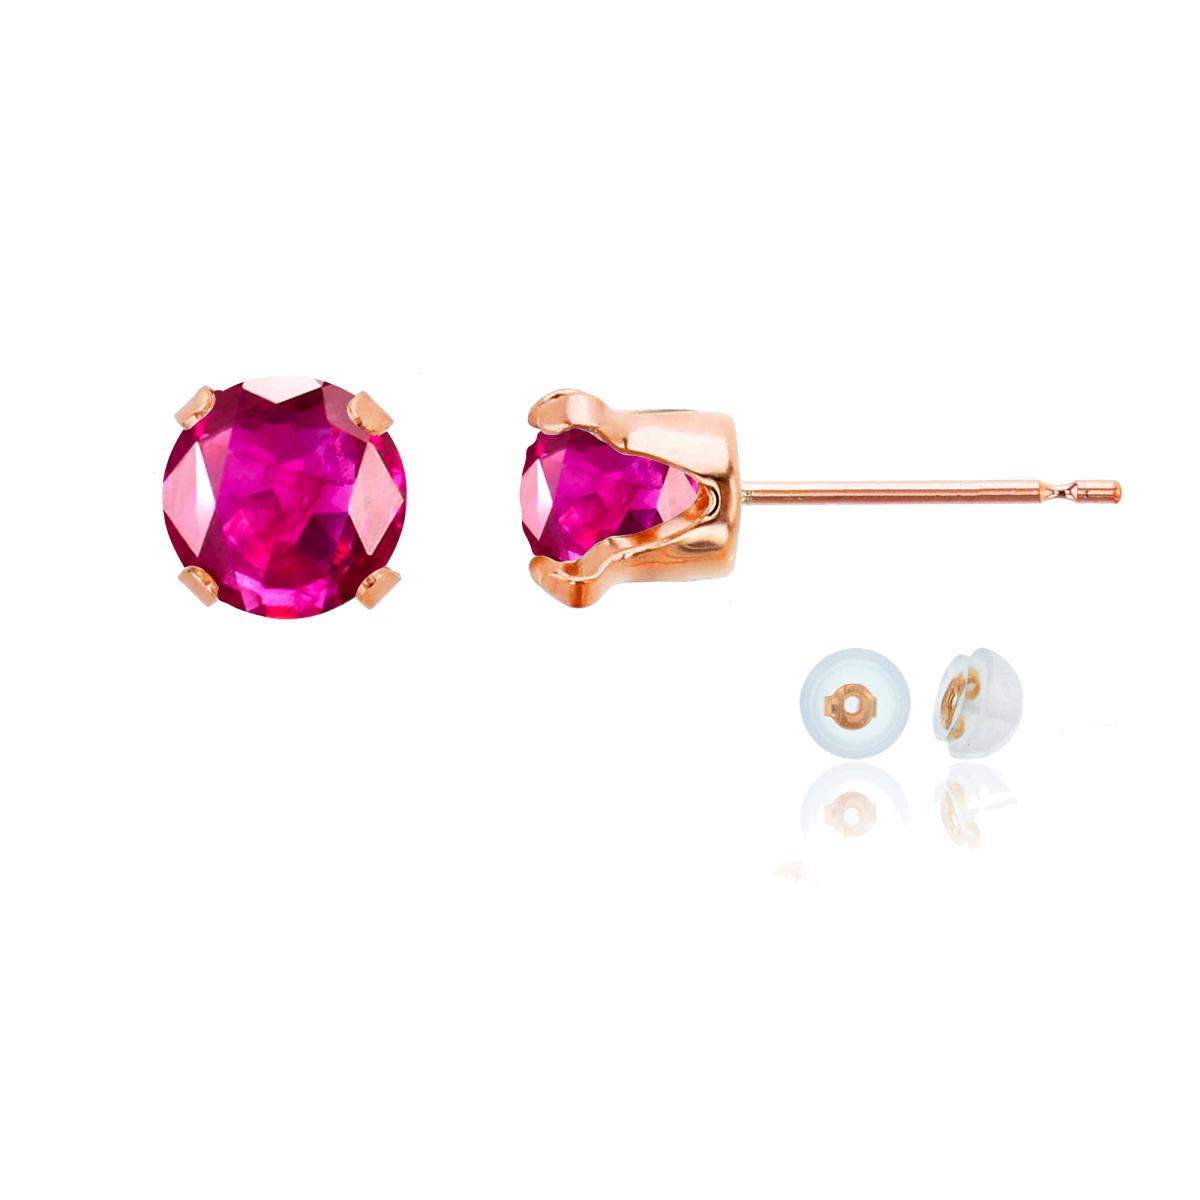 10K Rose Gold 6mm Round Cr Ruby Stud Earring with Silicone Back